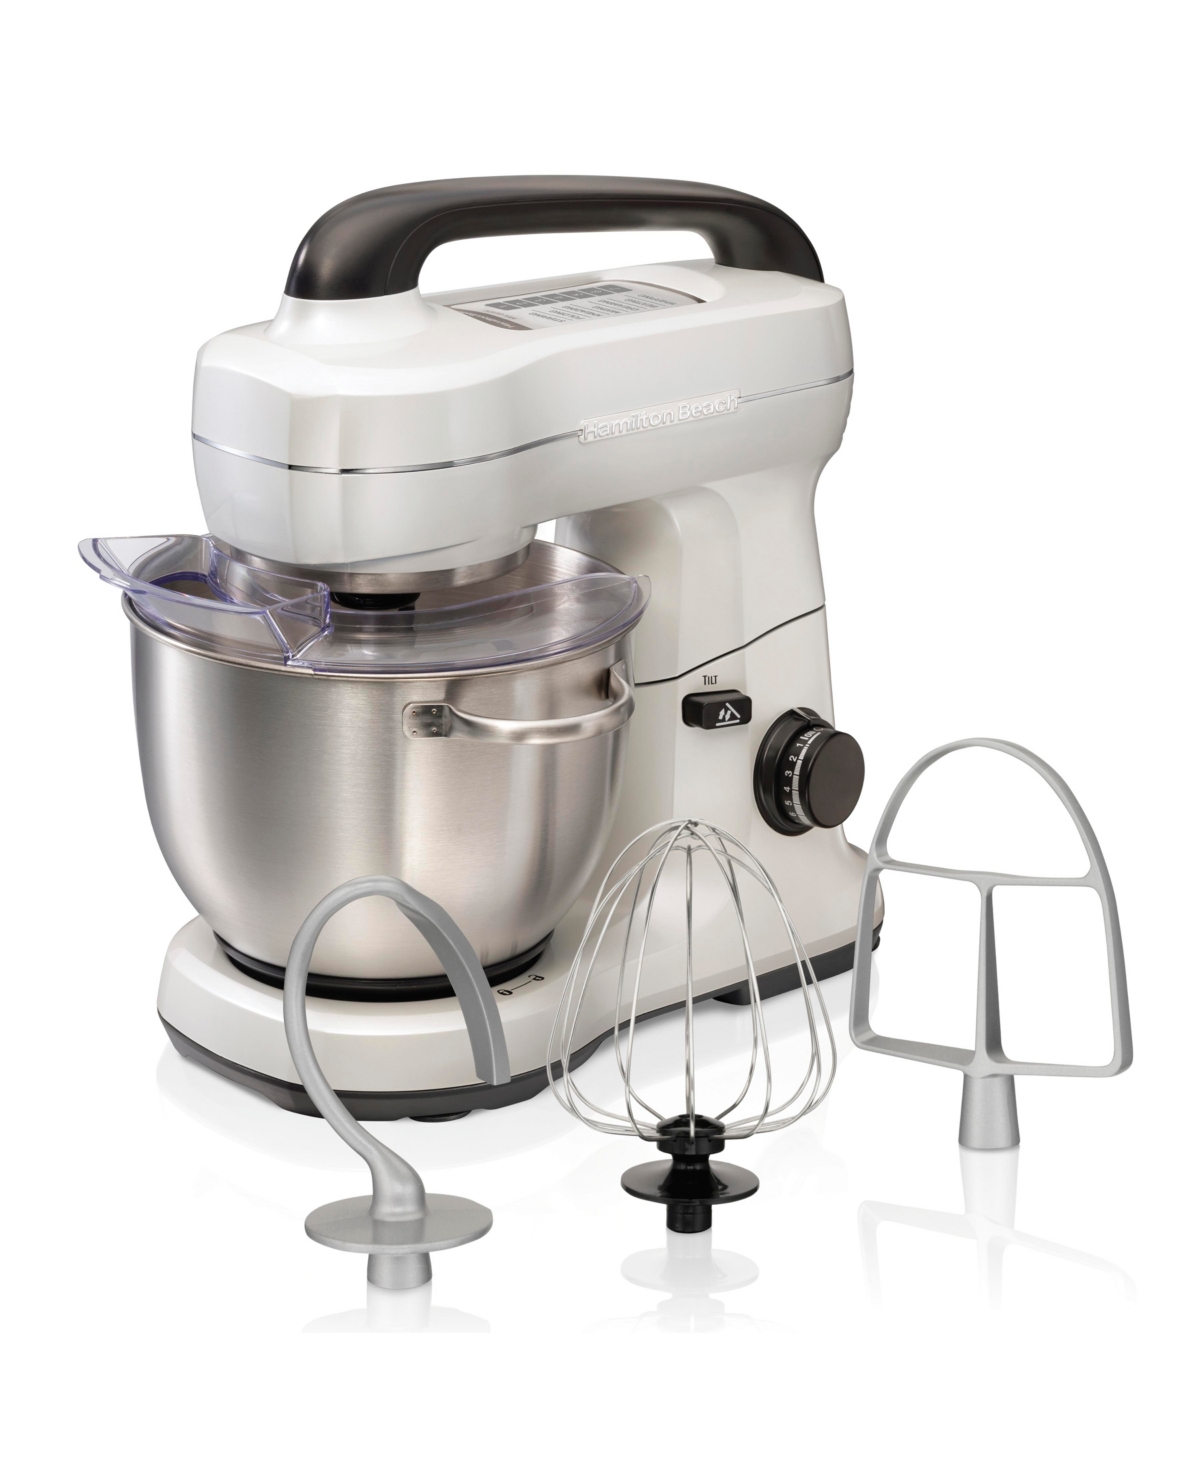 Hamilton Beach Stand Mixer With 4 Quart Stainless Steel Bowl In White